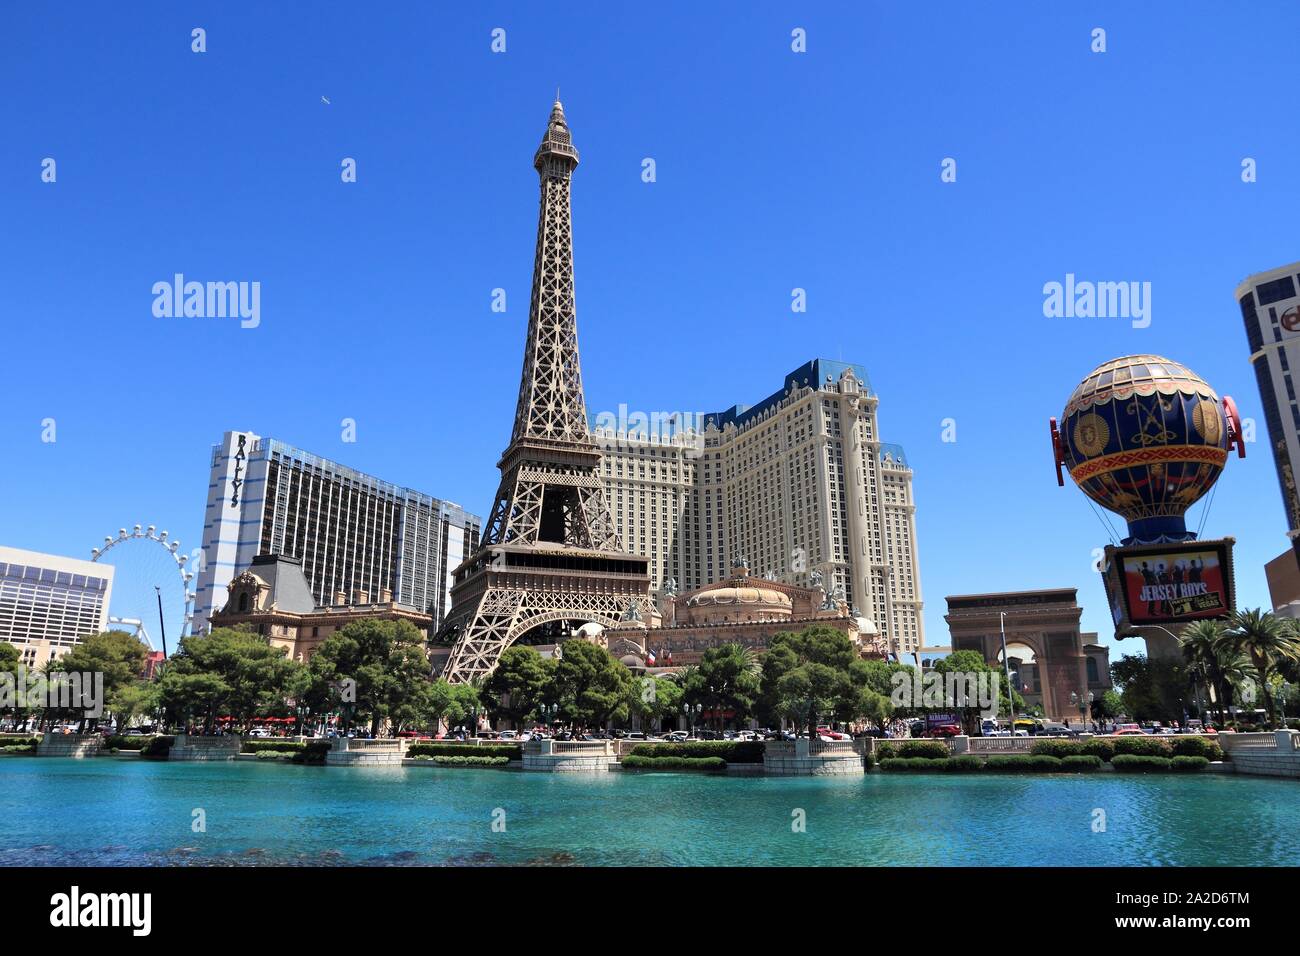 LAS VEGAS - SEPTEMBER 25 Aerial View Of Eiffel Tower At Paris Hotel And  Casino On September 25, 2014 In Las Vegas.The Resort Has An Hotel With  2,915 Rooms And A Half